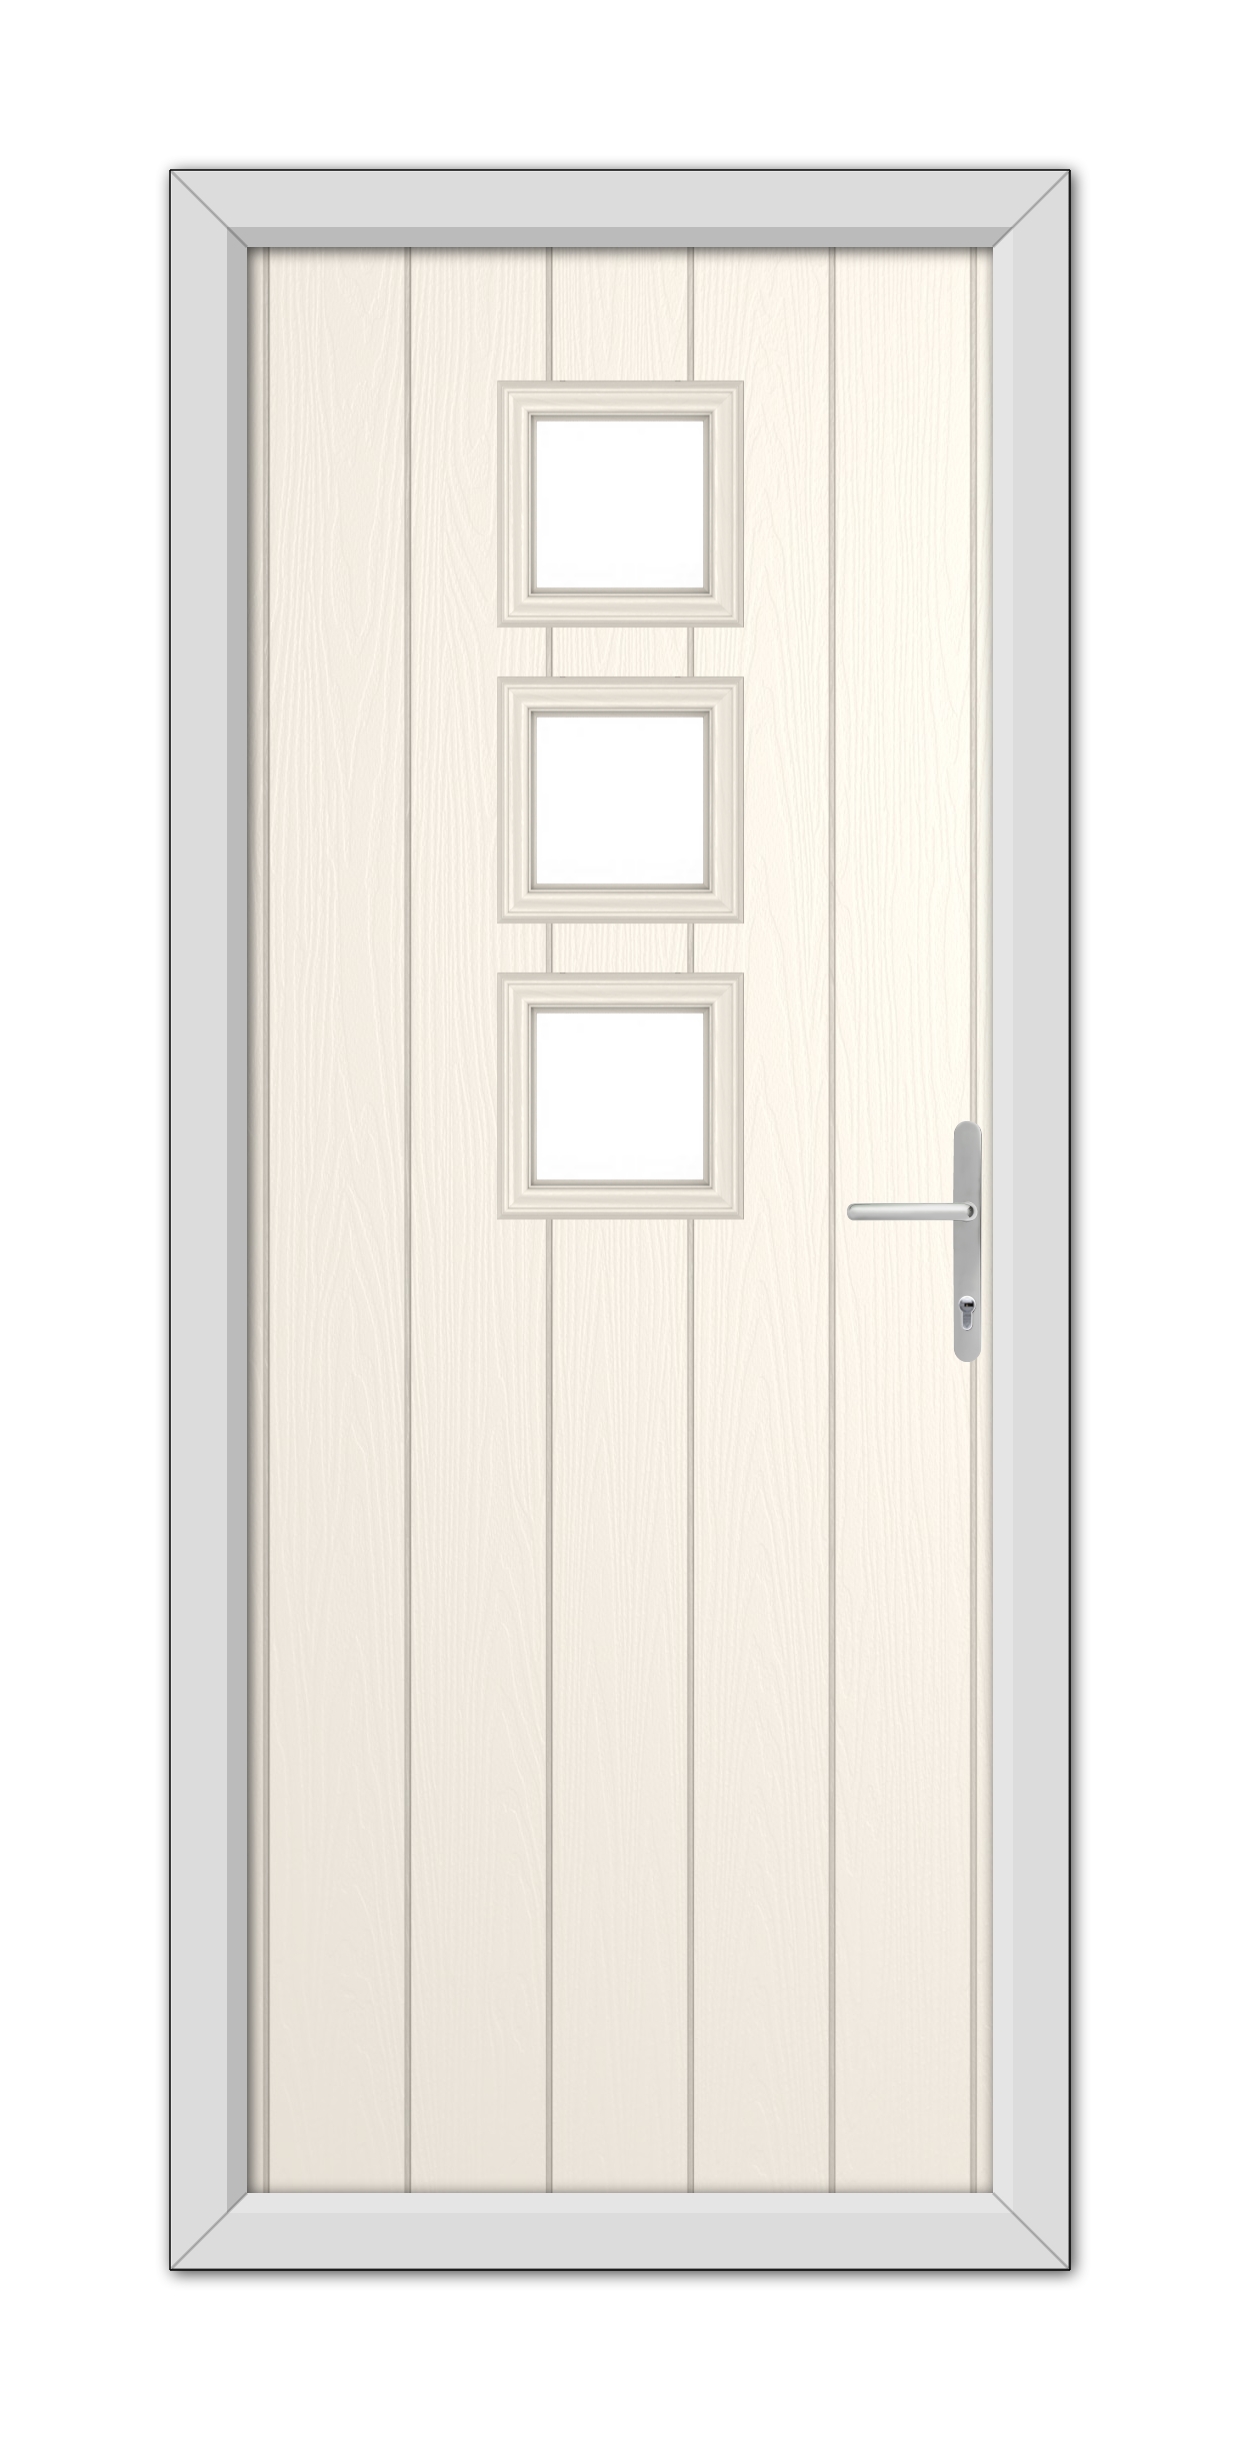 A modern White Foil Montrose Composite Door 48mm Timber Core featuring three rectangular frosted glass windows, framed by a gray door frame, with a metallic handle on the right.